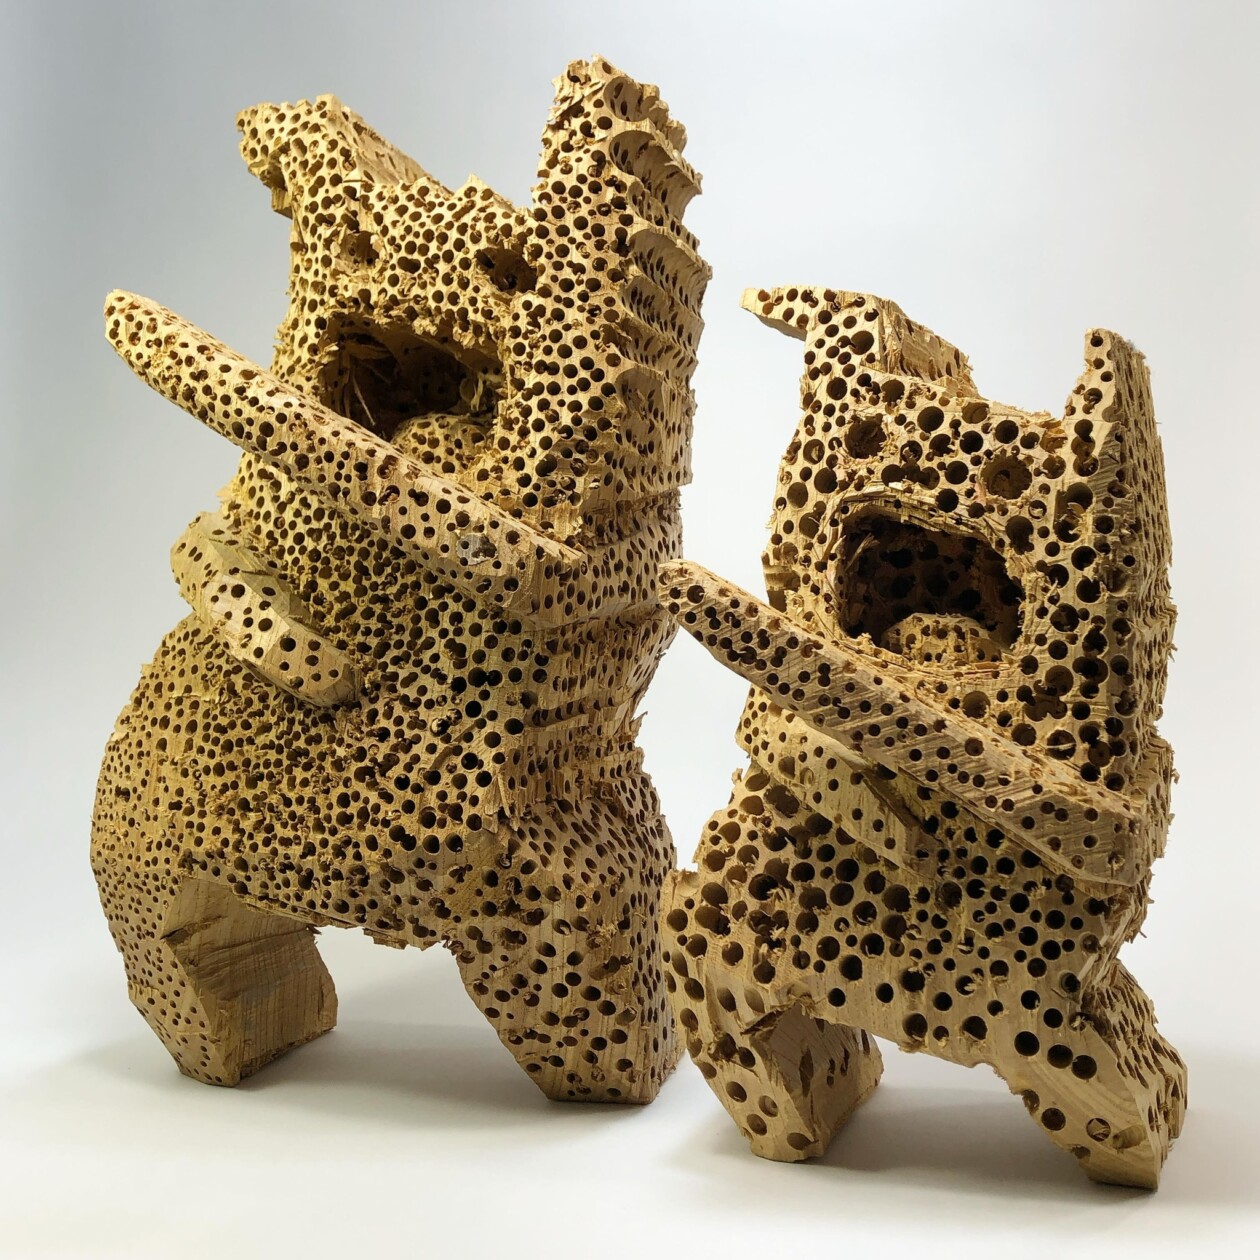 The Enchanting World Of Hirosuke Yabe's Wooden Beings (1)